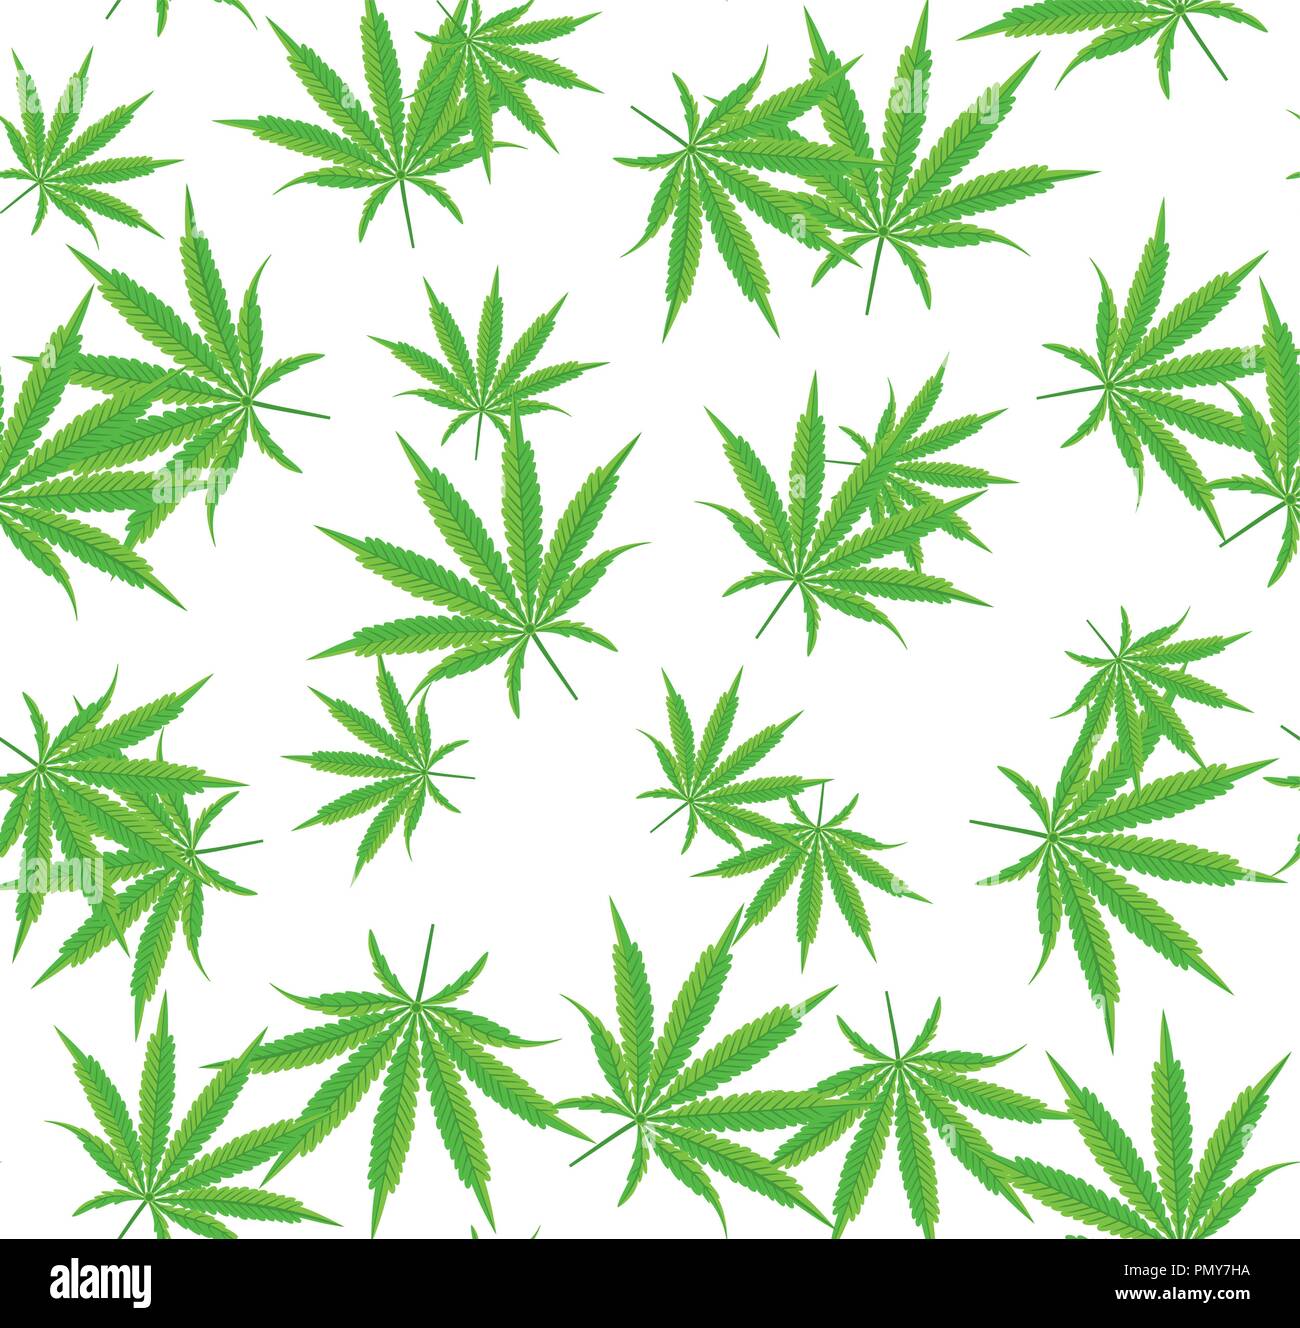 Cannabis or Marijuana Seamless Pattern with Leavevs Isolated on White. Vector Illustration. Stock Vector